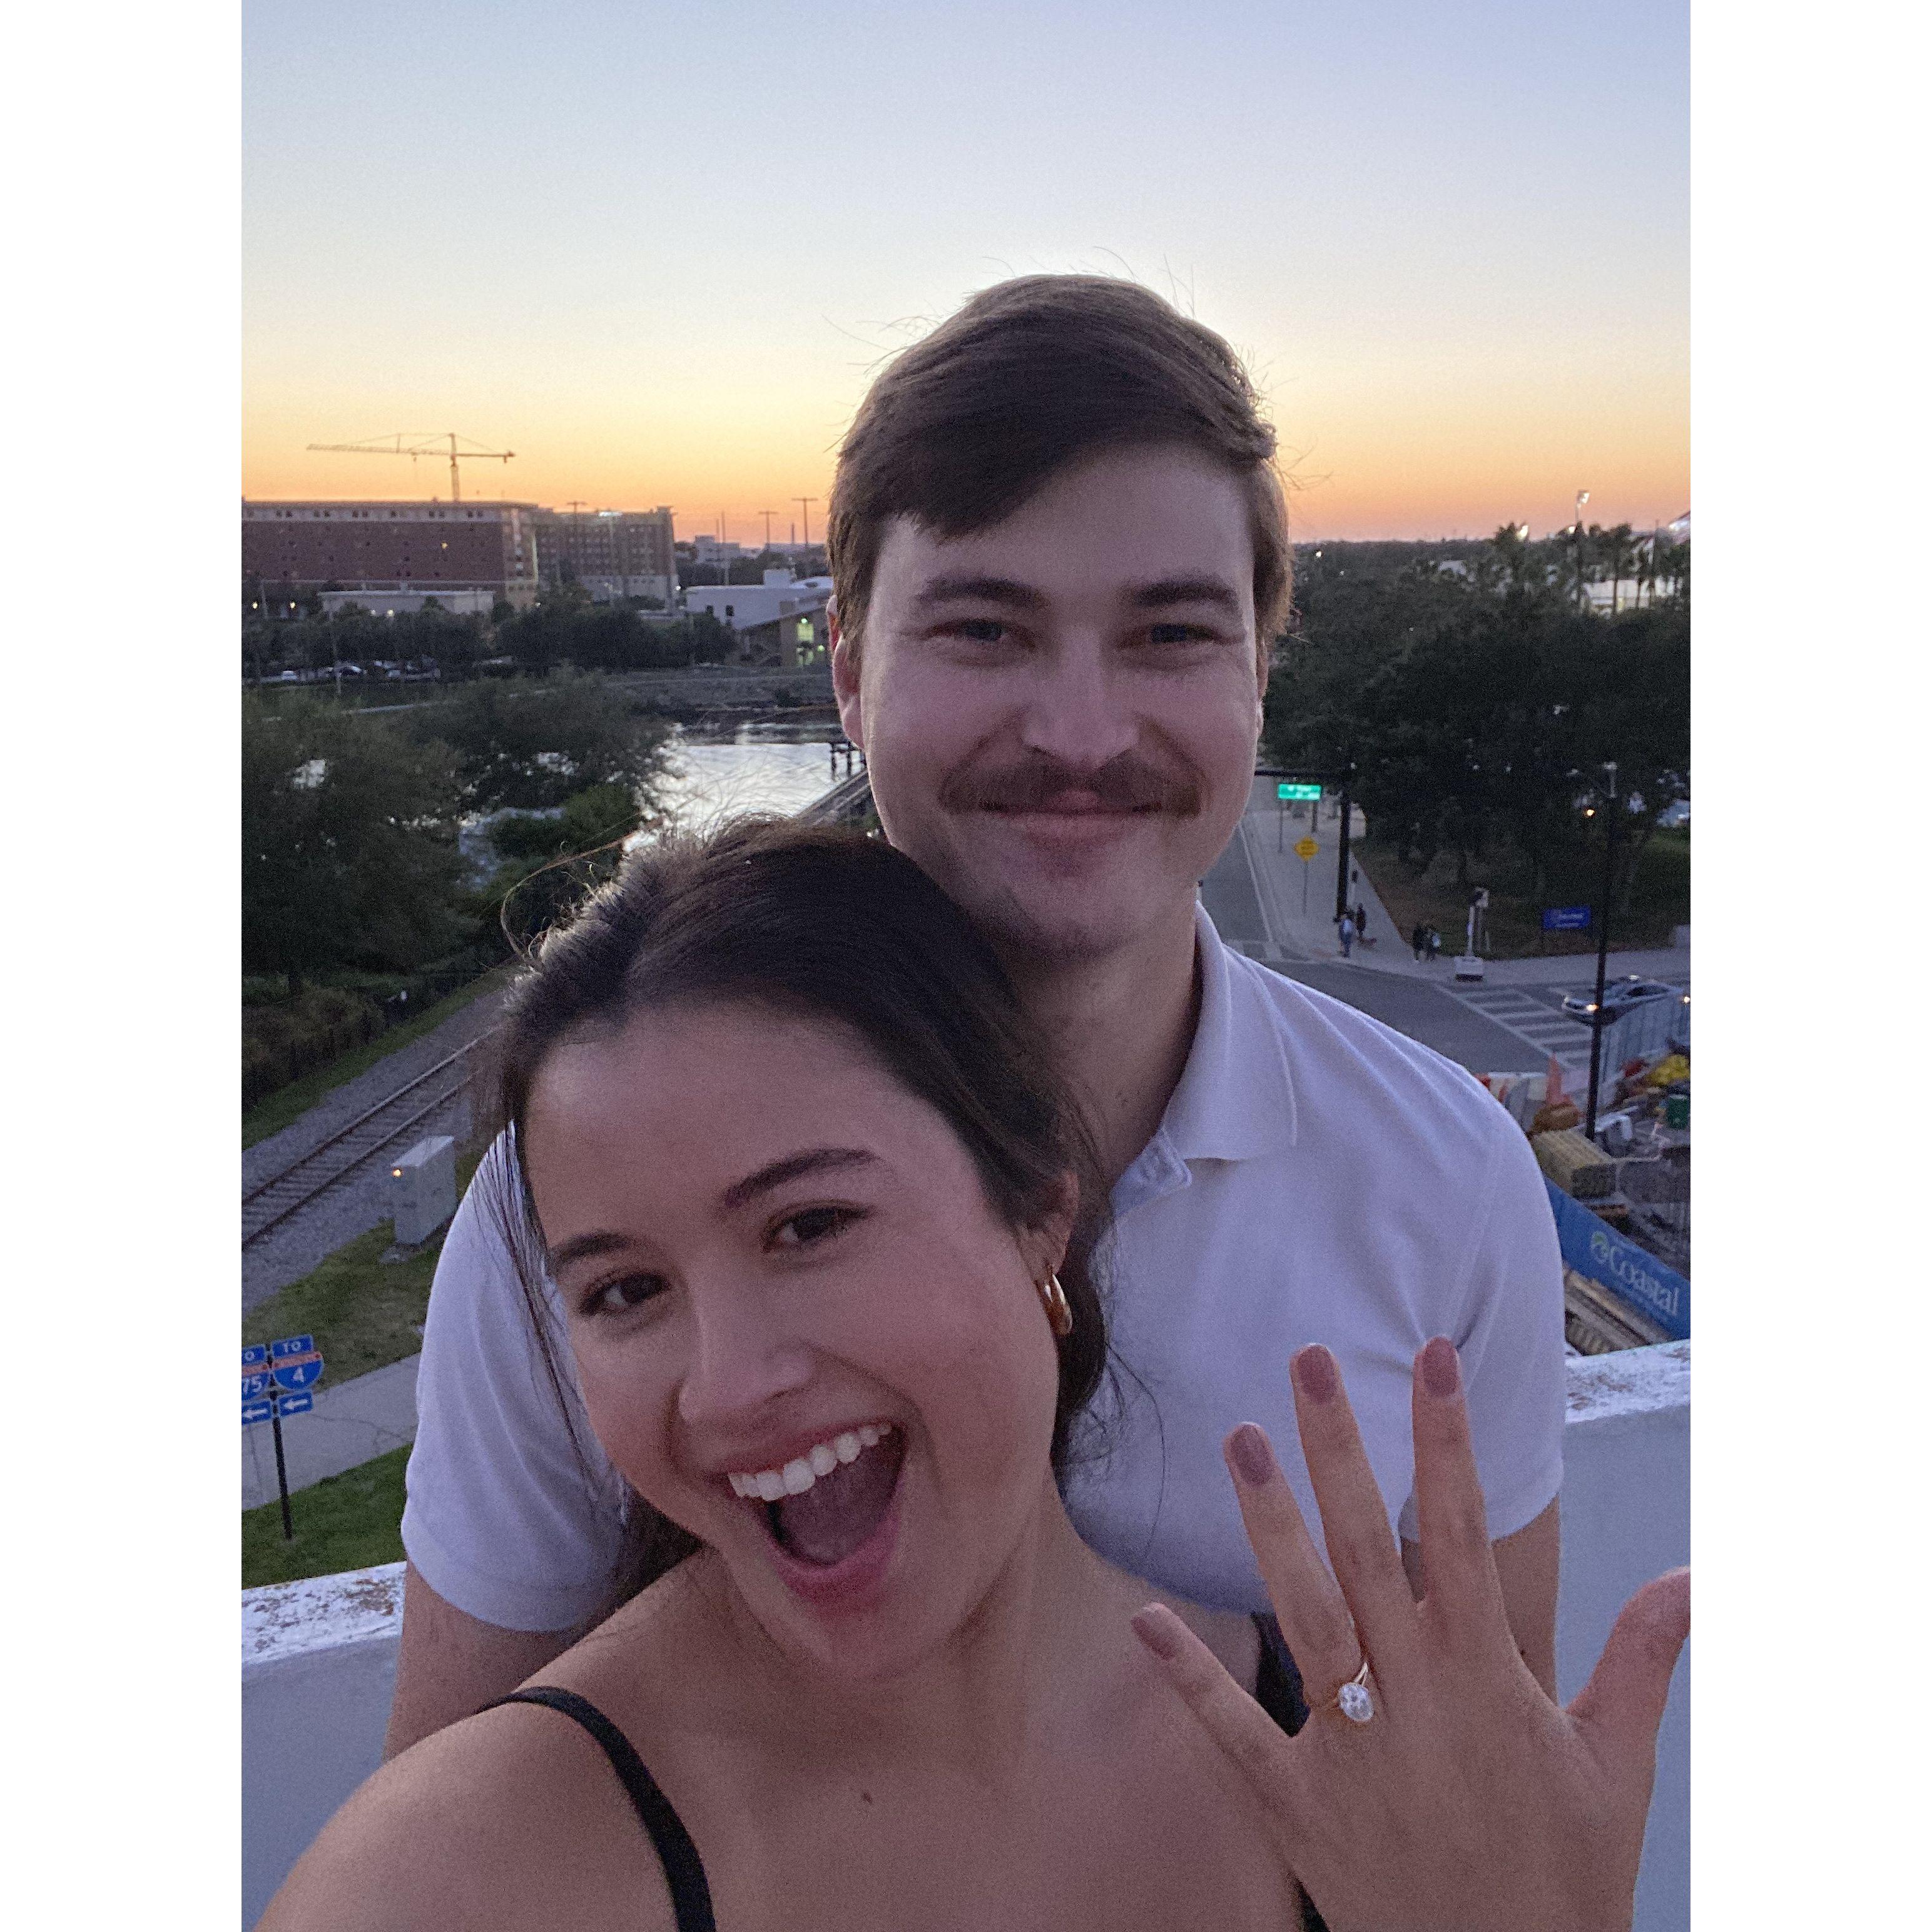 We tried to make it to the rooftop for sunset but ended up making it for this *almost* sunset picture.